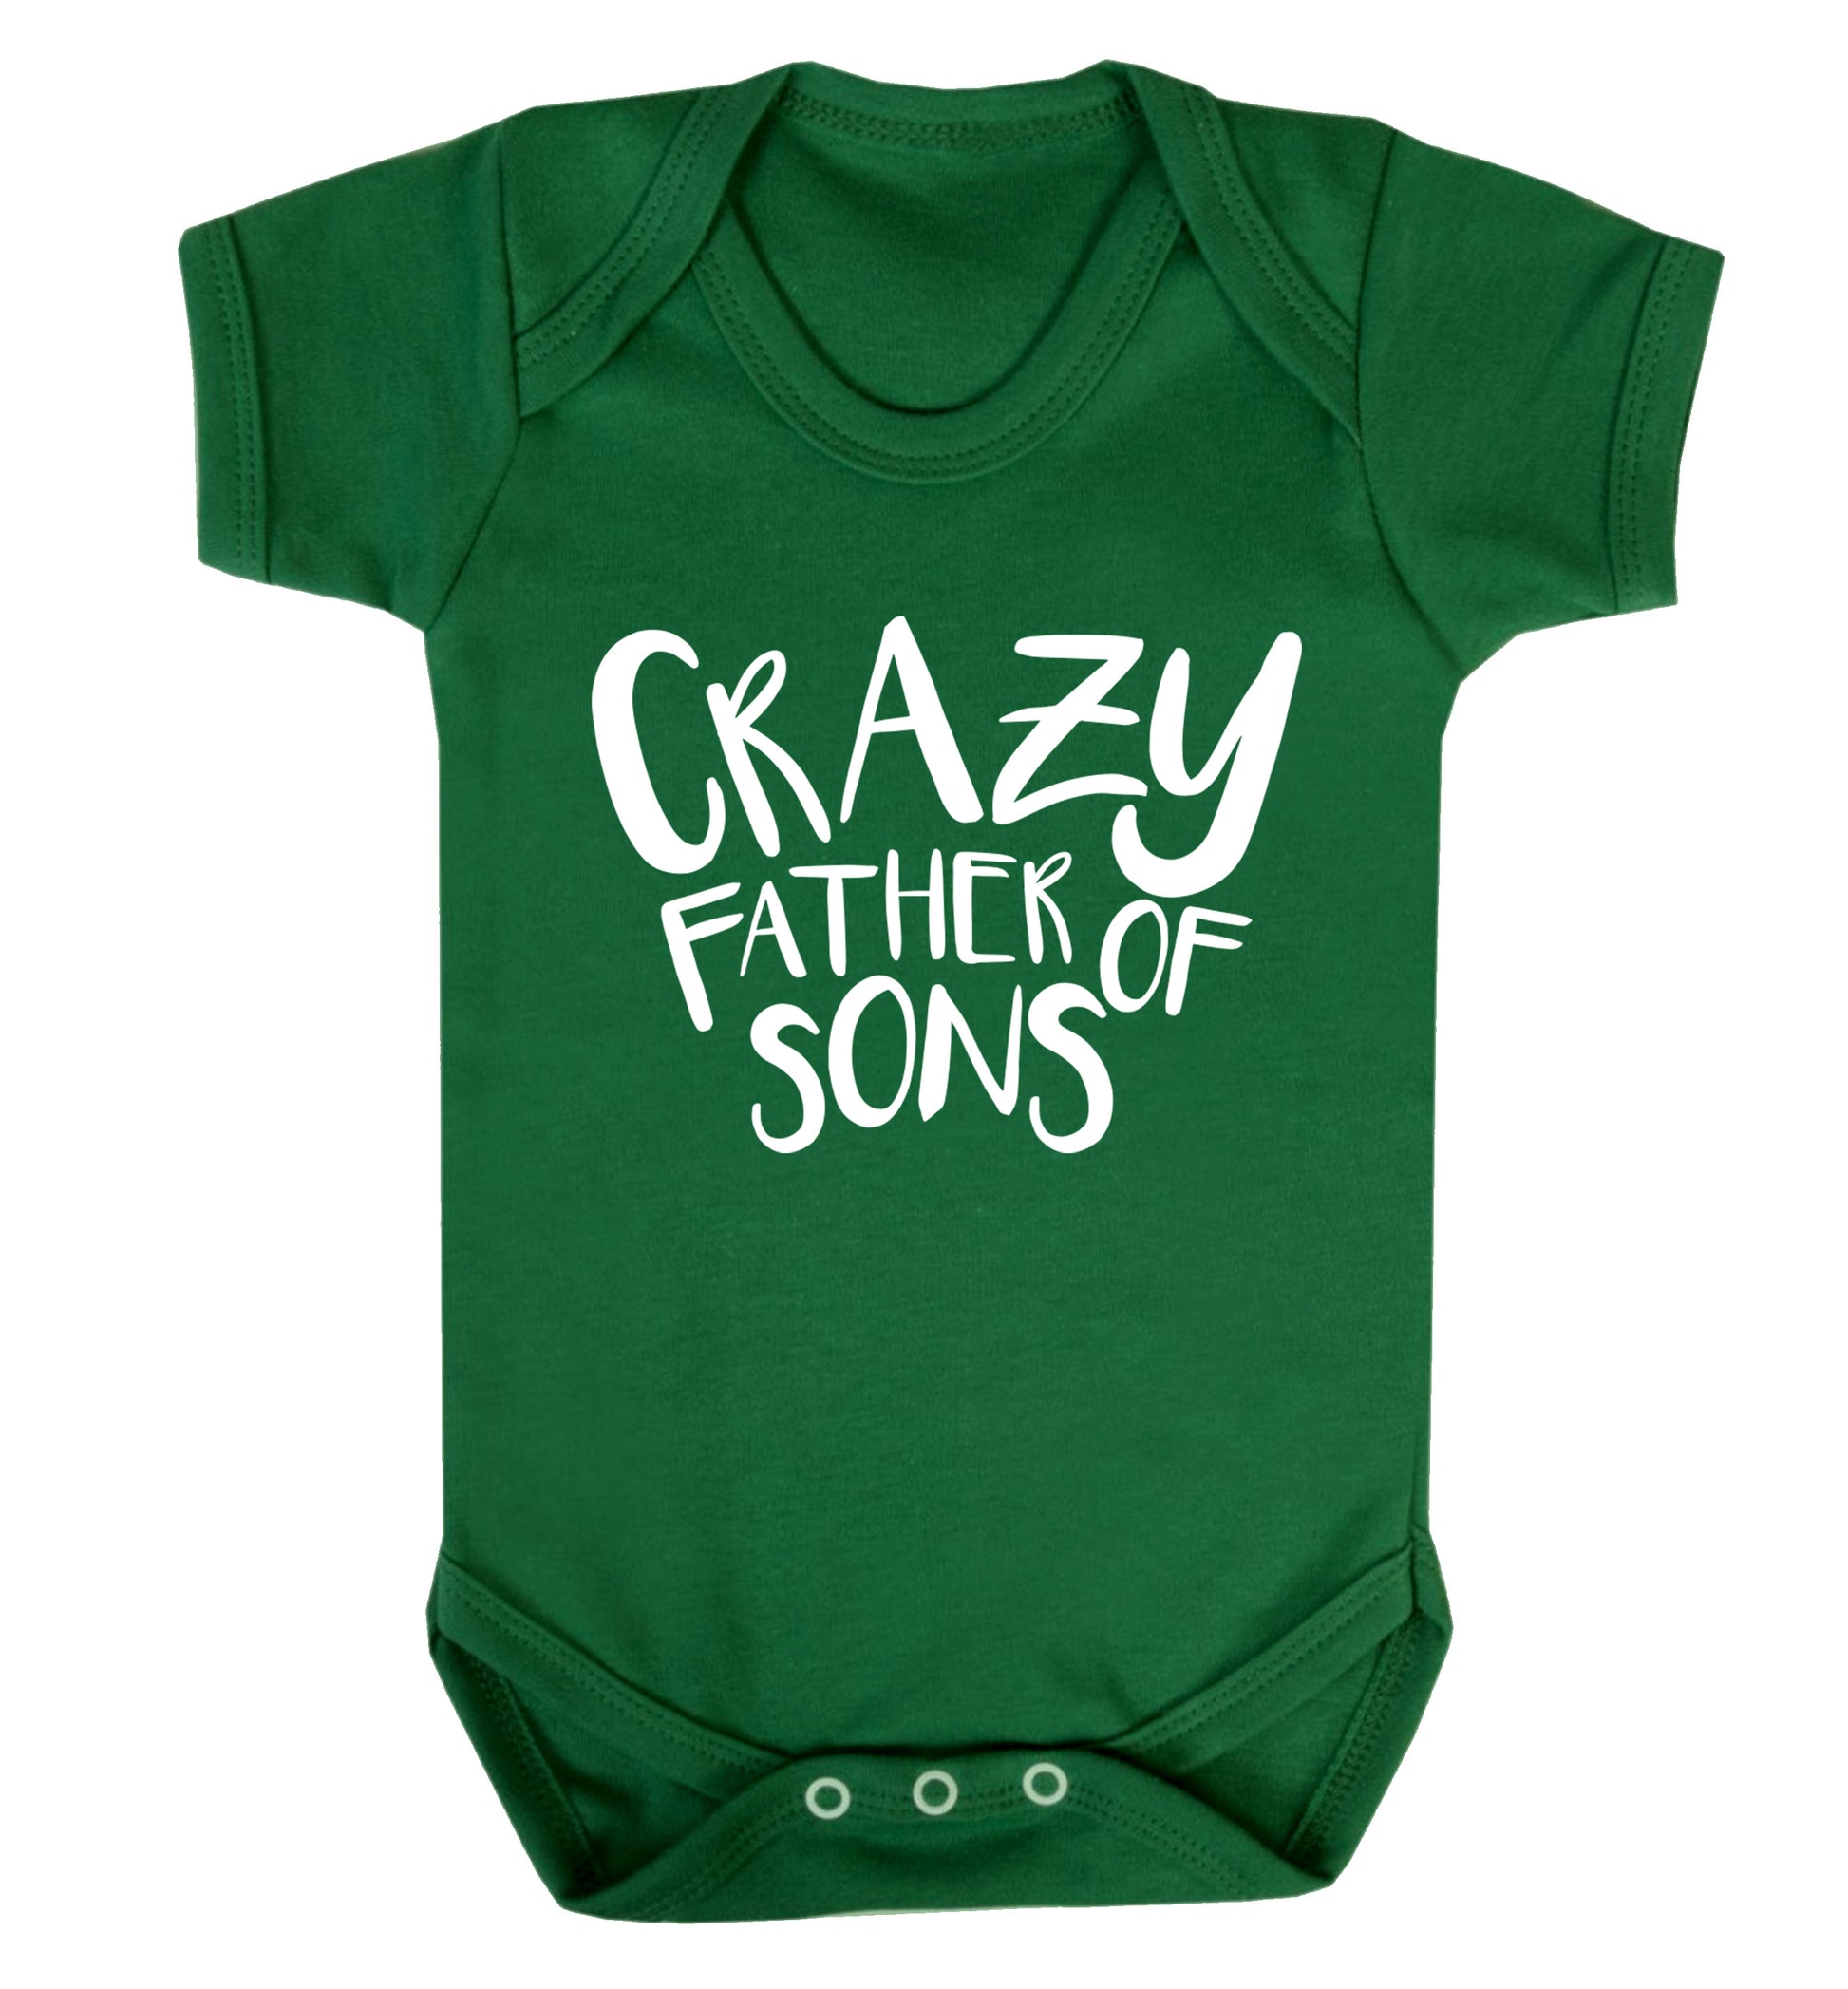 Crazy father of sons Baby Vest green 18-24 months